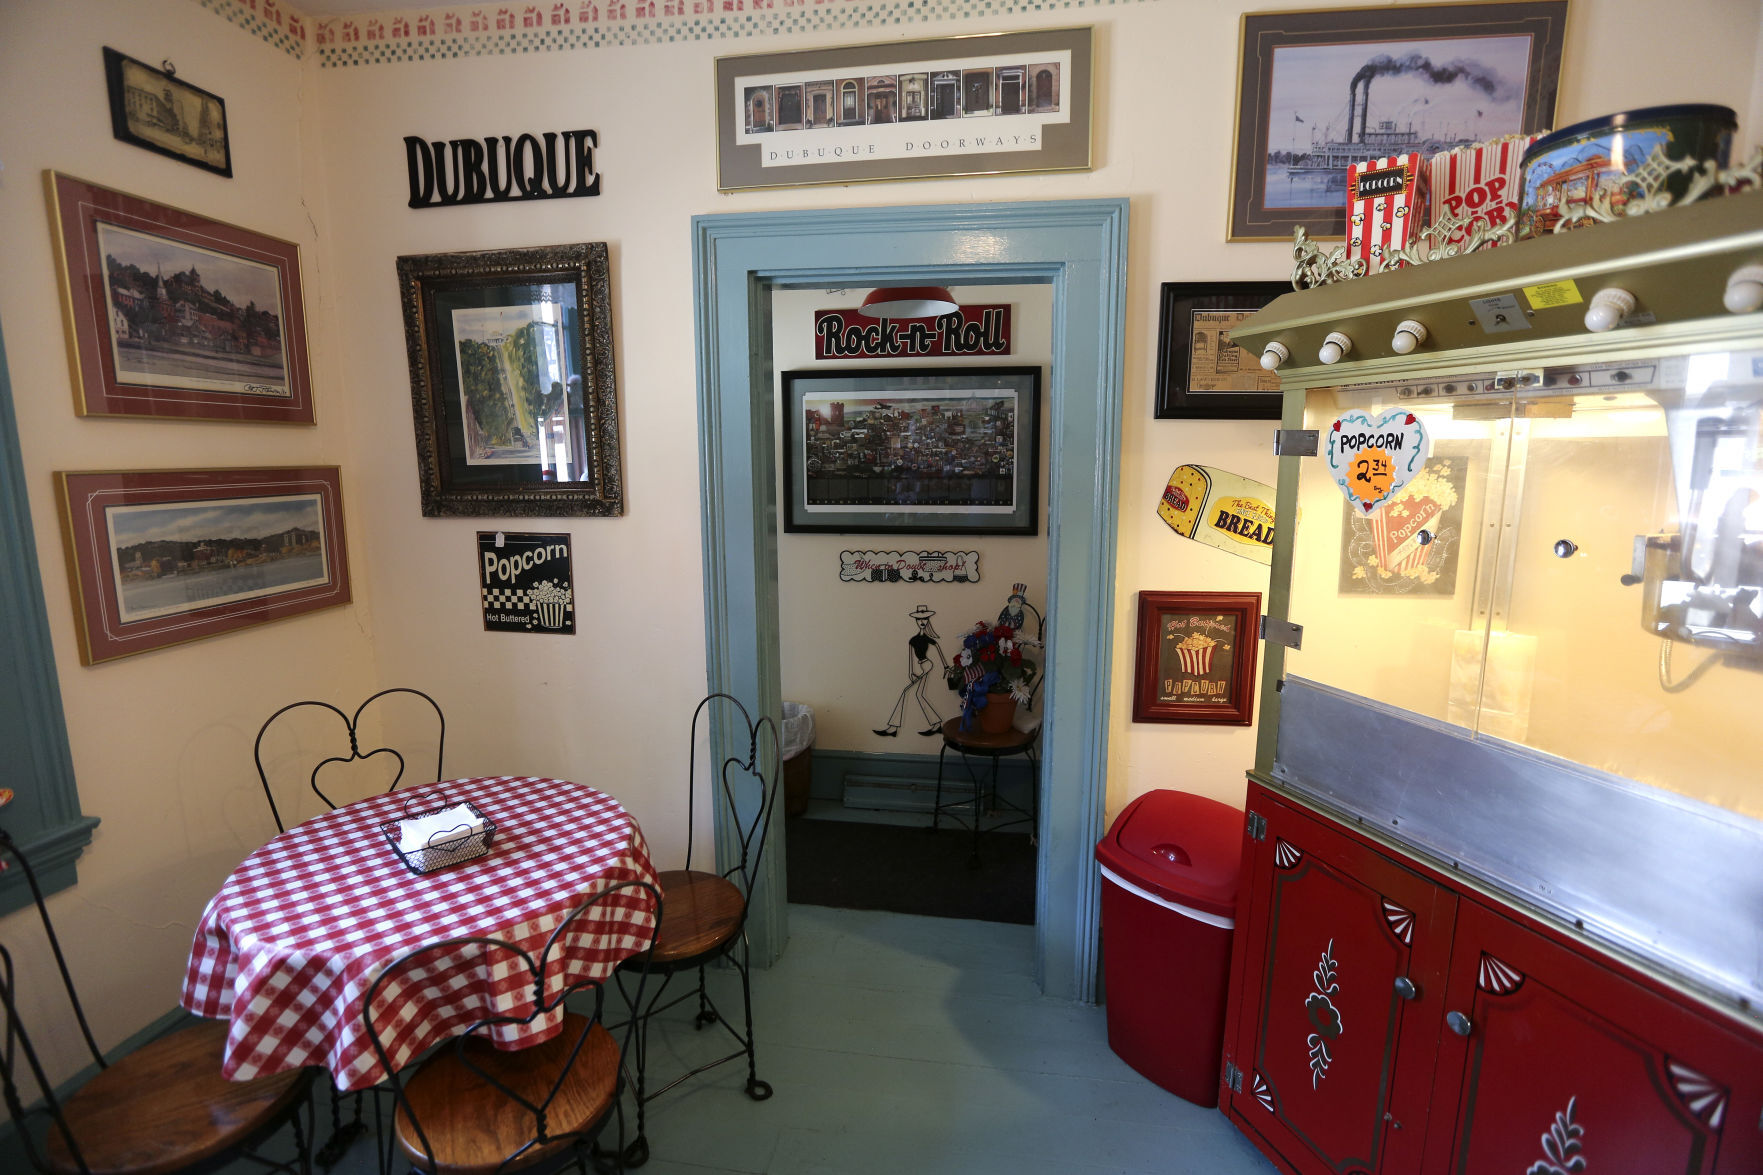 Inside view of Sweet Memories located in Cable Car Square on 4th Street in Dubuque.    PHOTO CREDIT: Dave Kettering